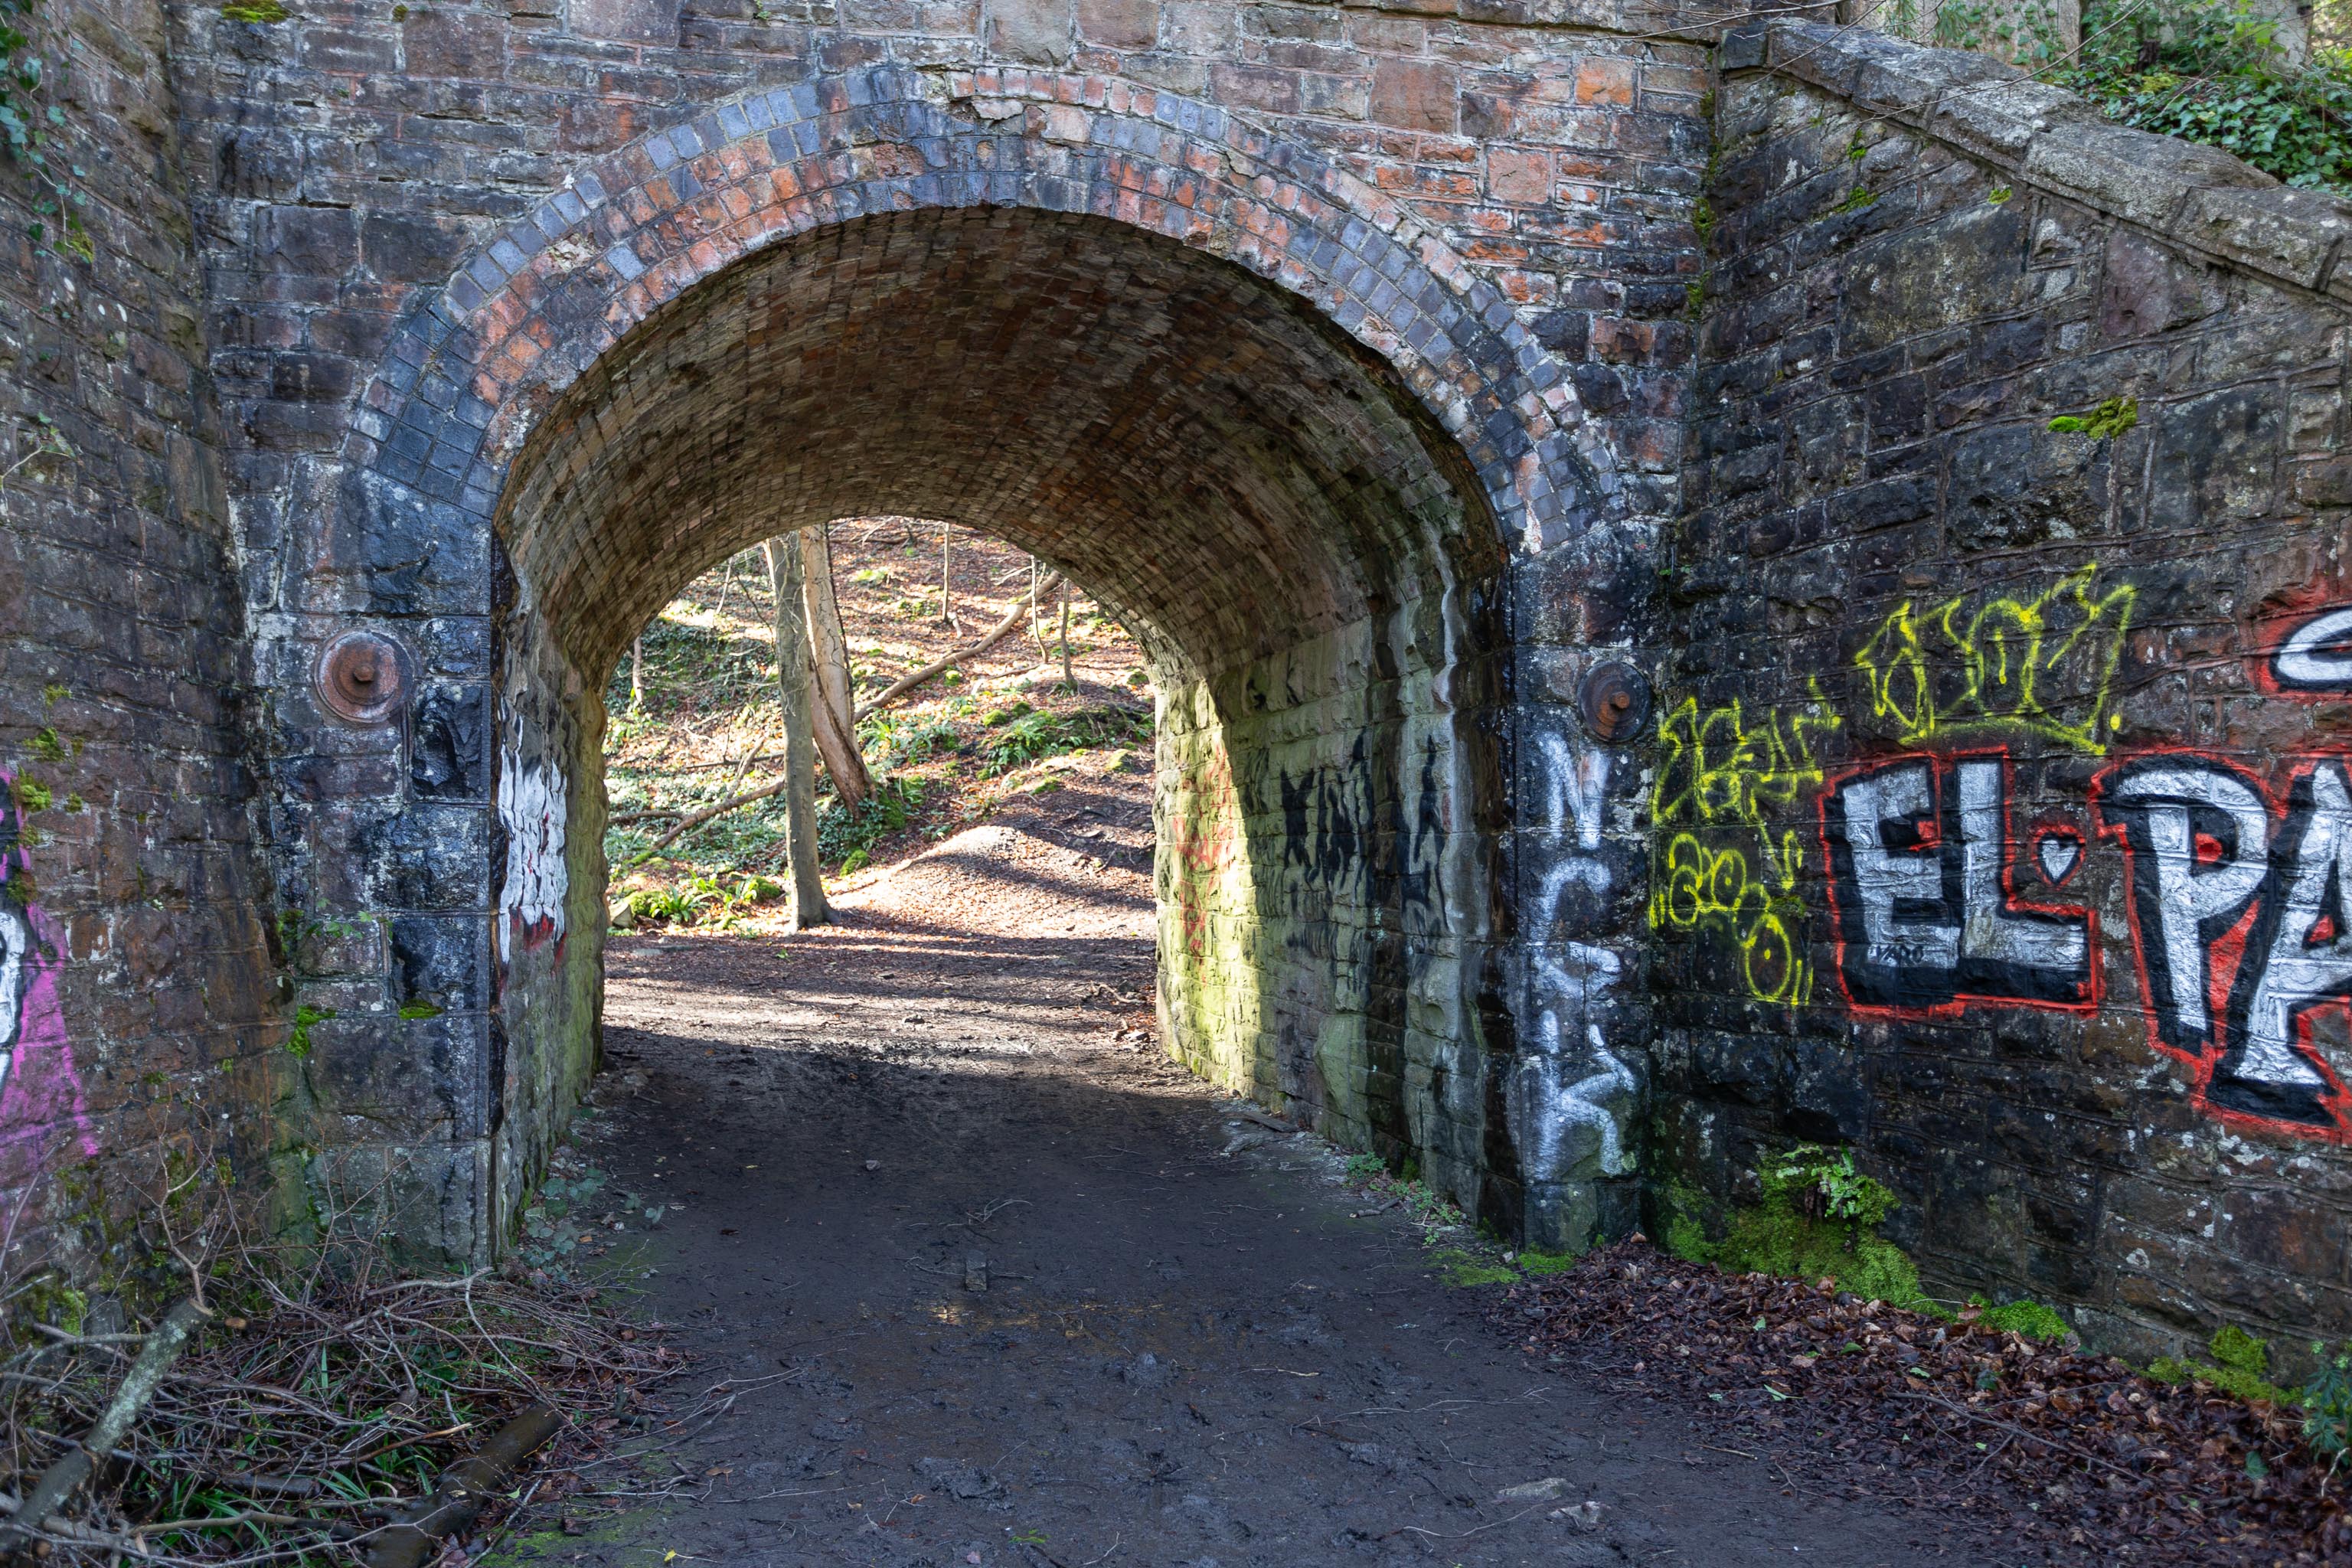 Entrance
There are several ways into Leigh Woods along the towpath, all underneath bridges of the Portishead branch line that runs above.

At the one before...